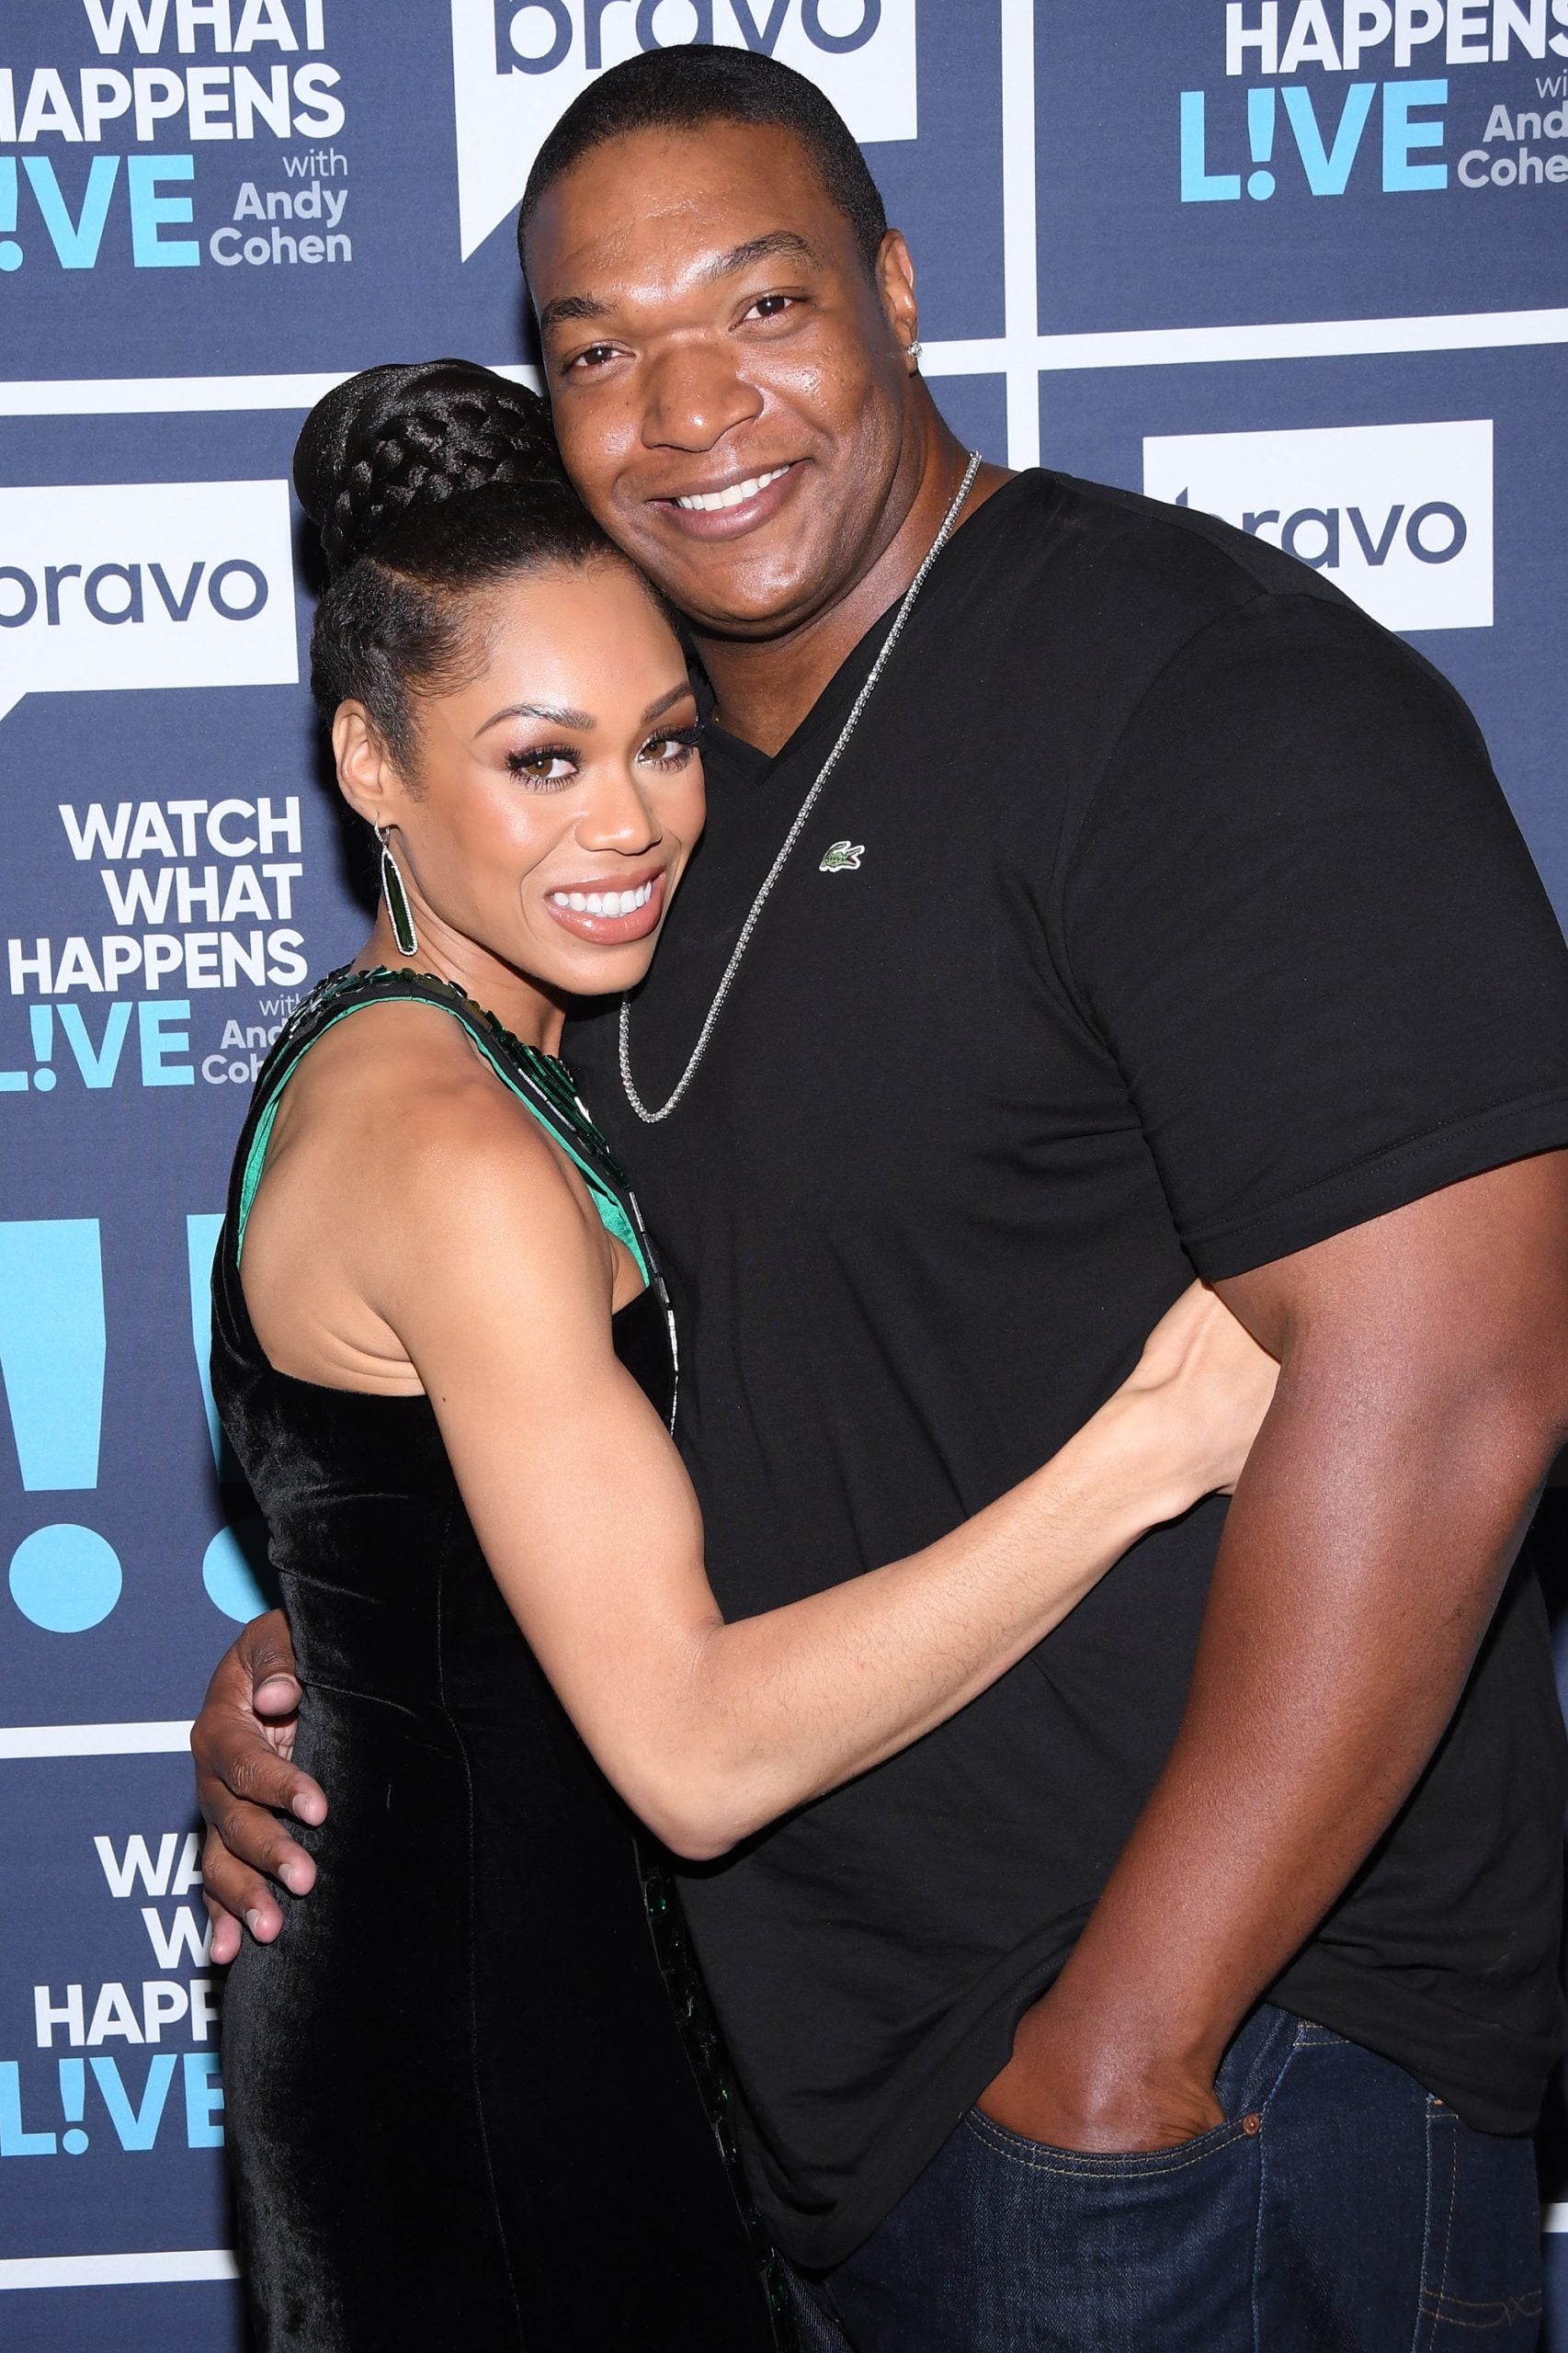 Monique Samuels Files For Divorce From Chris Samuels After 10 Years Of Marriage: A Timeline Of Their Relationship